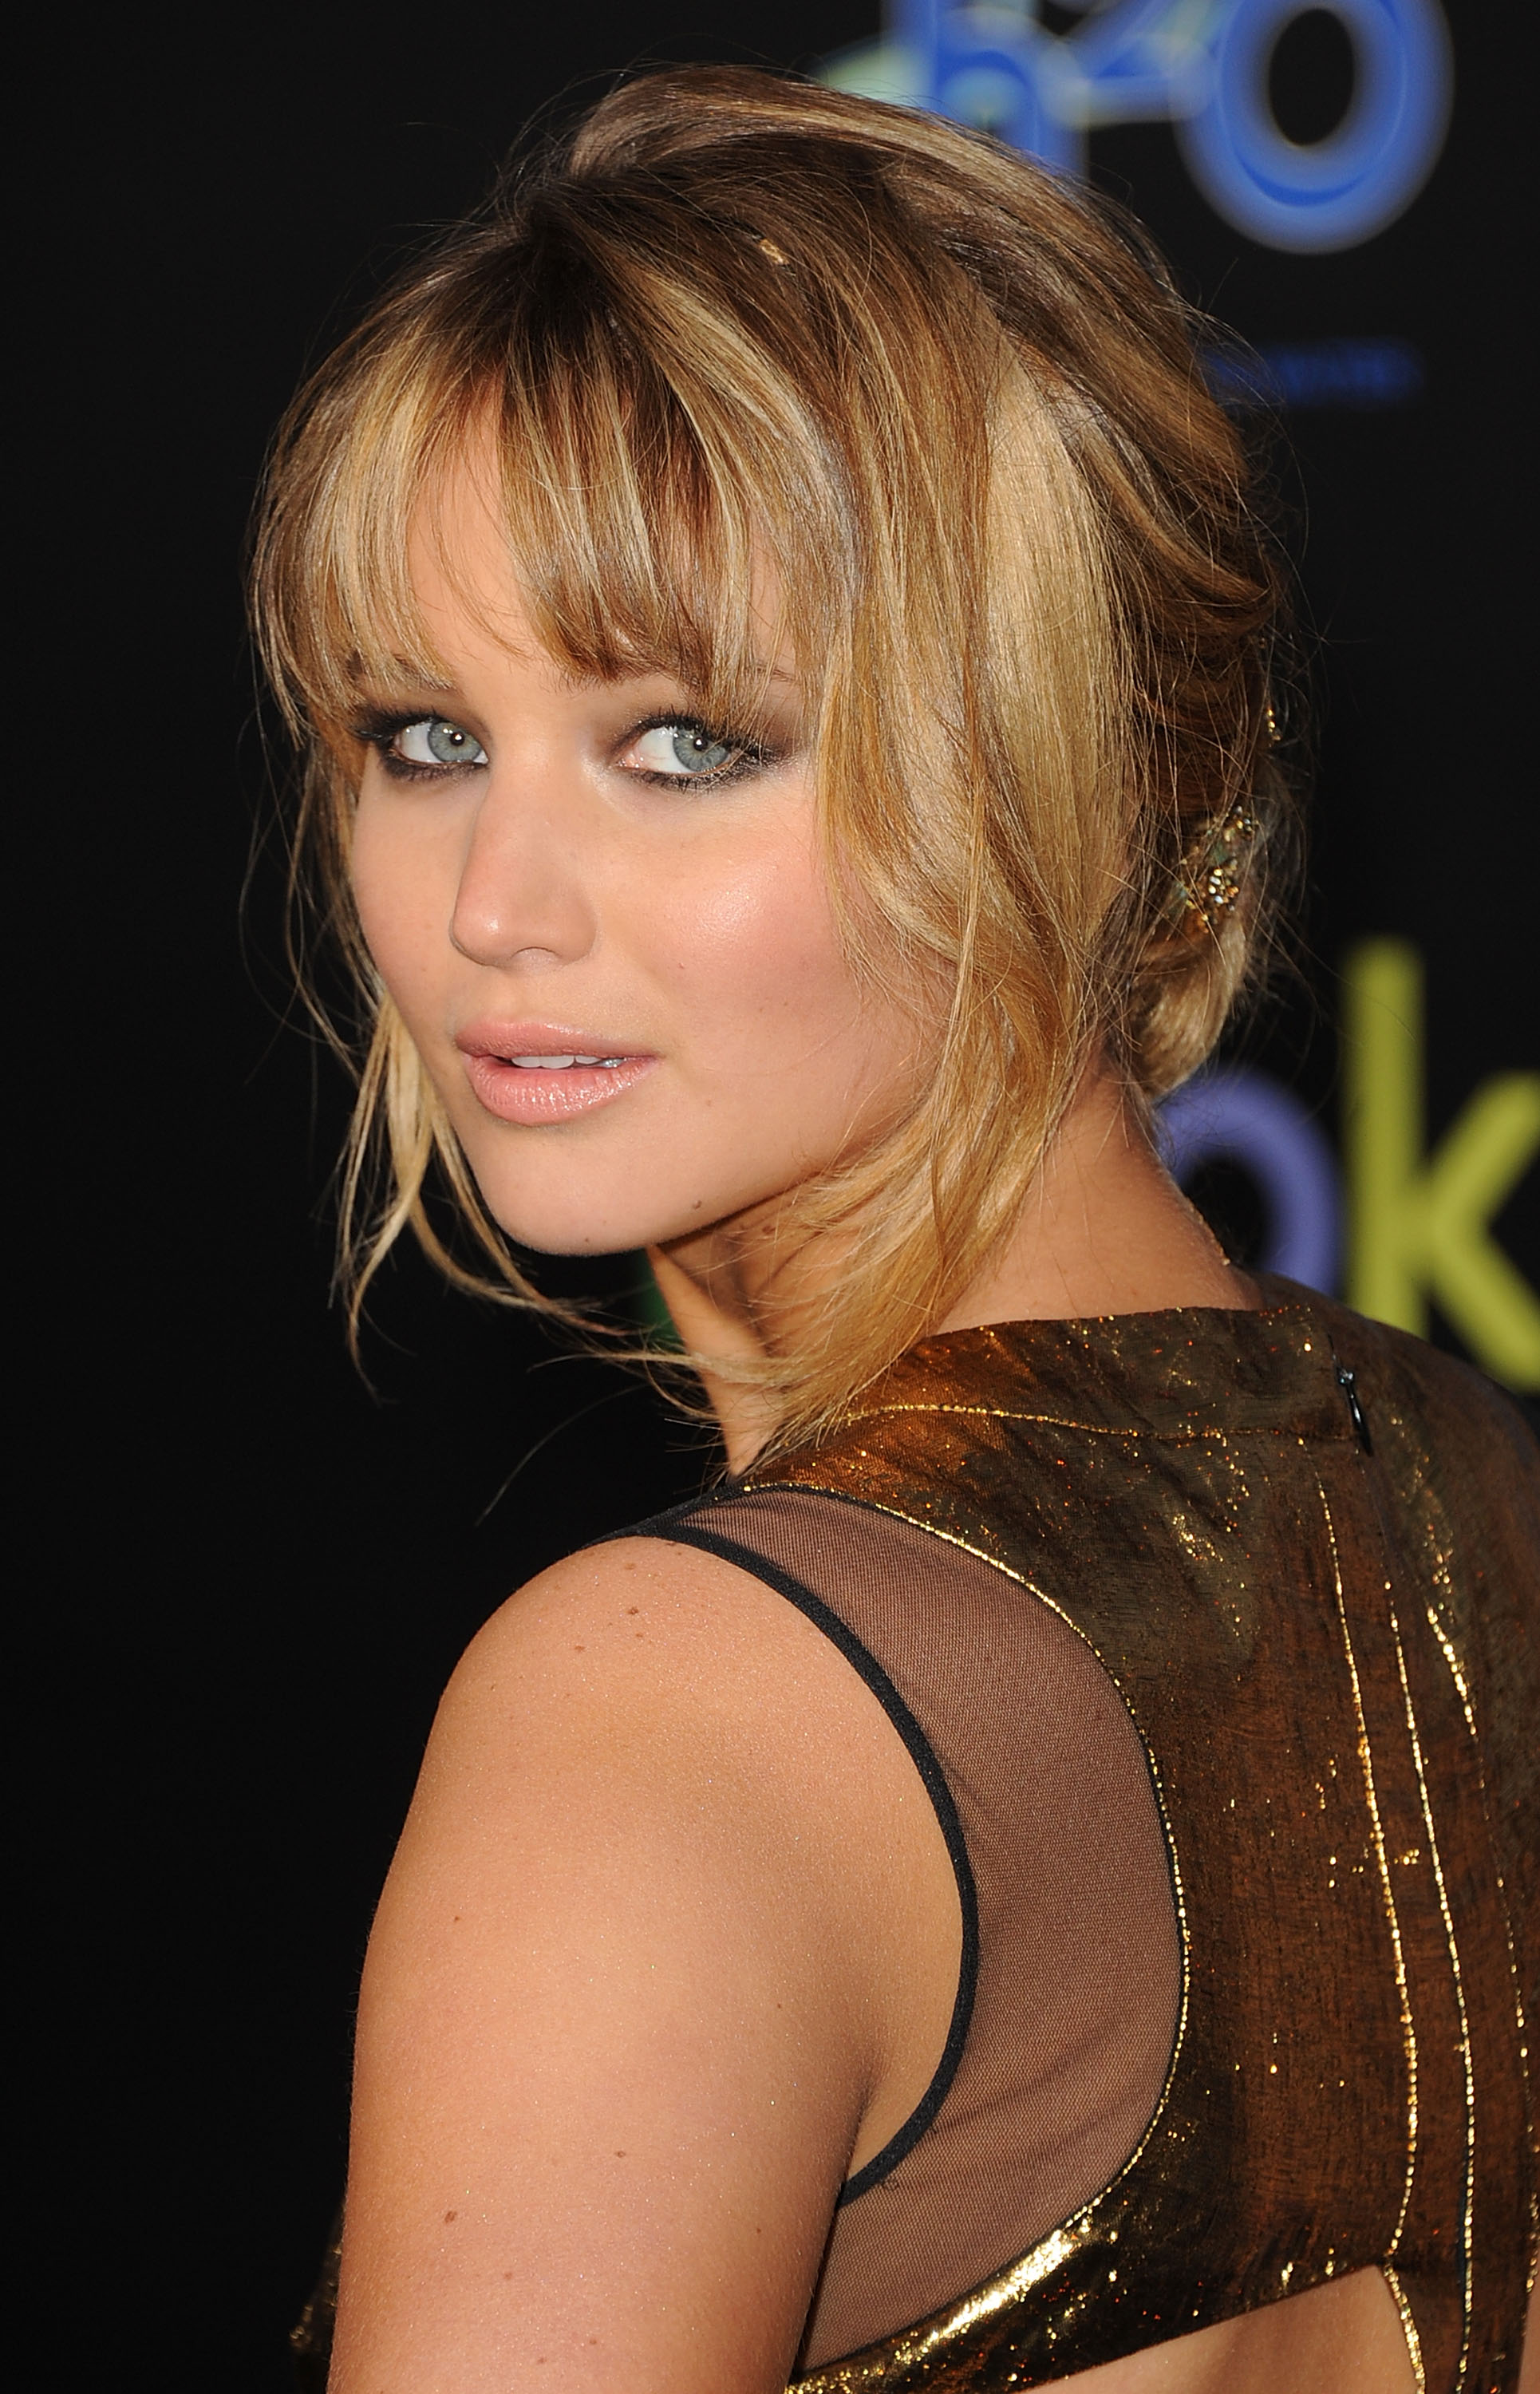 Actress Jennifer Lawrence arrives at the premiere of Lionsgate's 'The Hunger Games' at Nokia Theatre L.A. Live on March 12, 2012 in Los Angeles, California. (Photo by Jason Merritt/Getty Images)